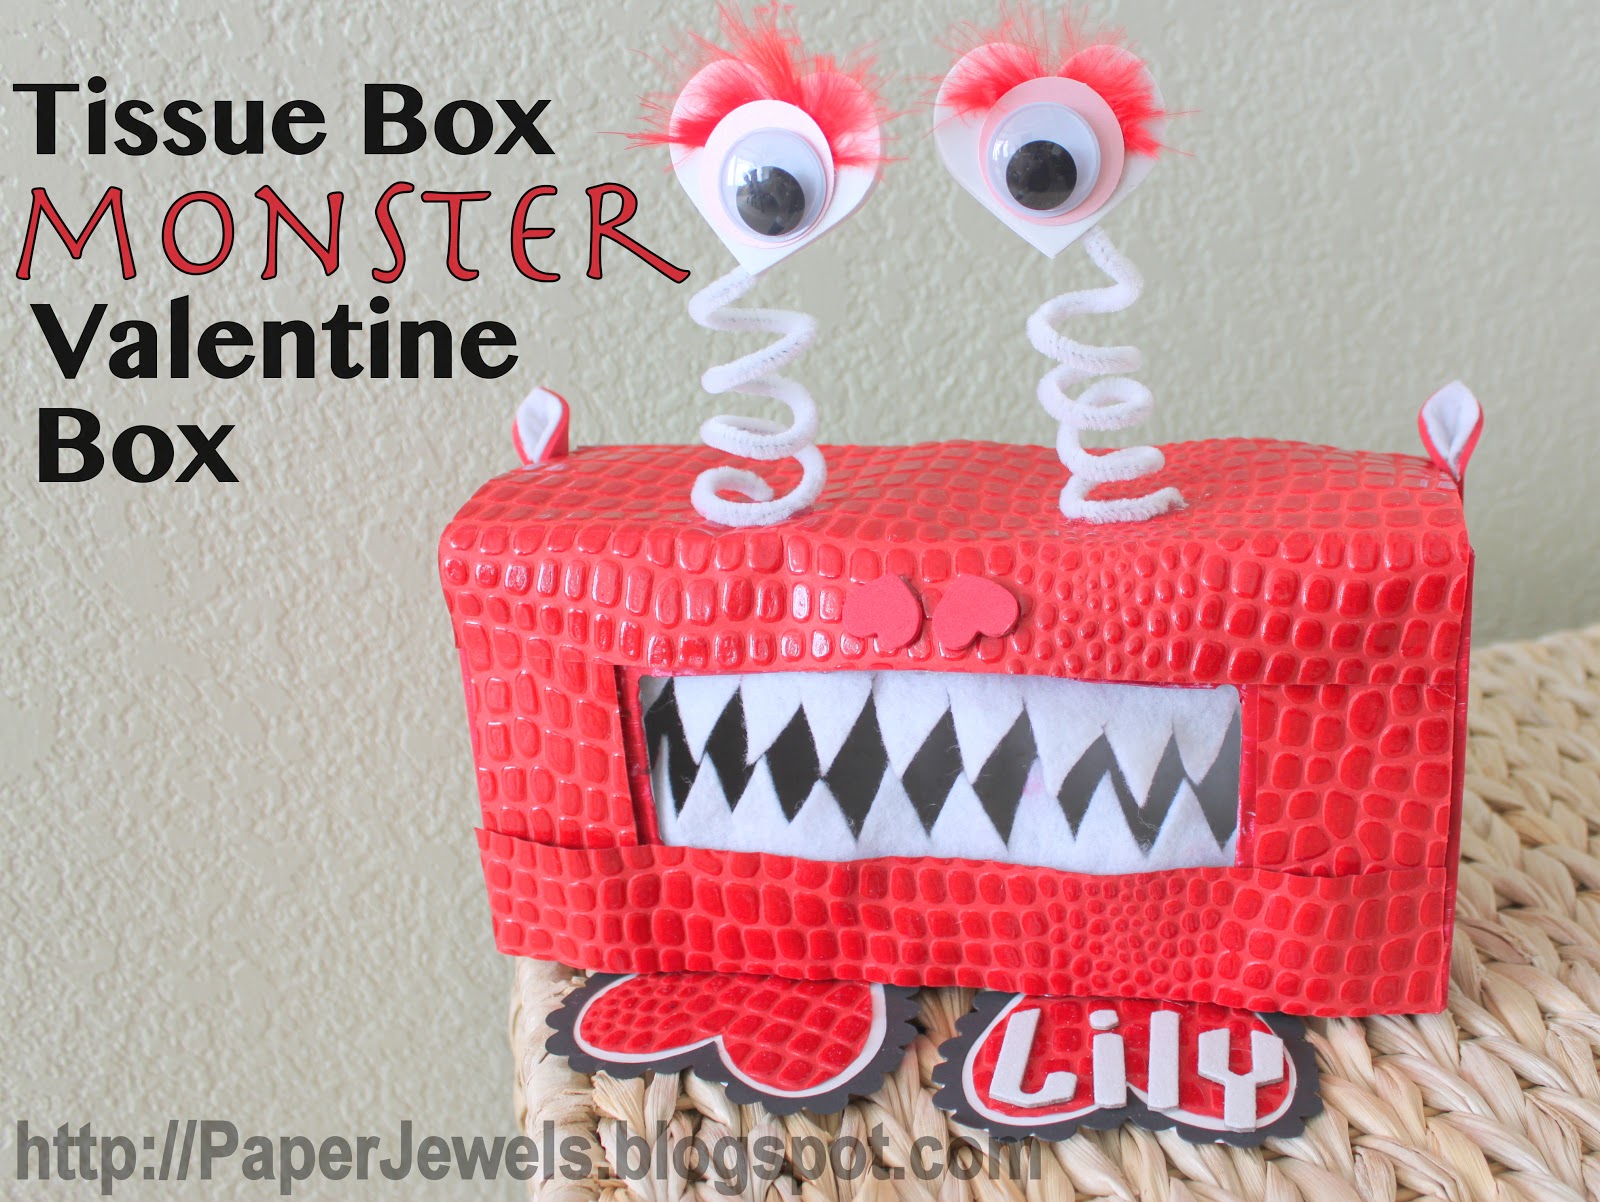 Paper Jewels and other Crafty Gems: More Valentine Boxes